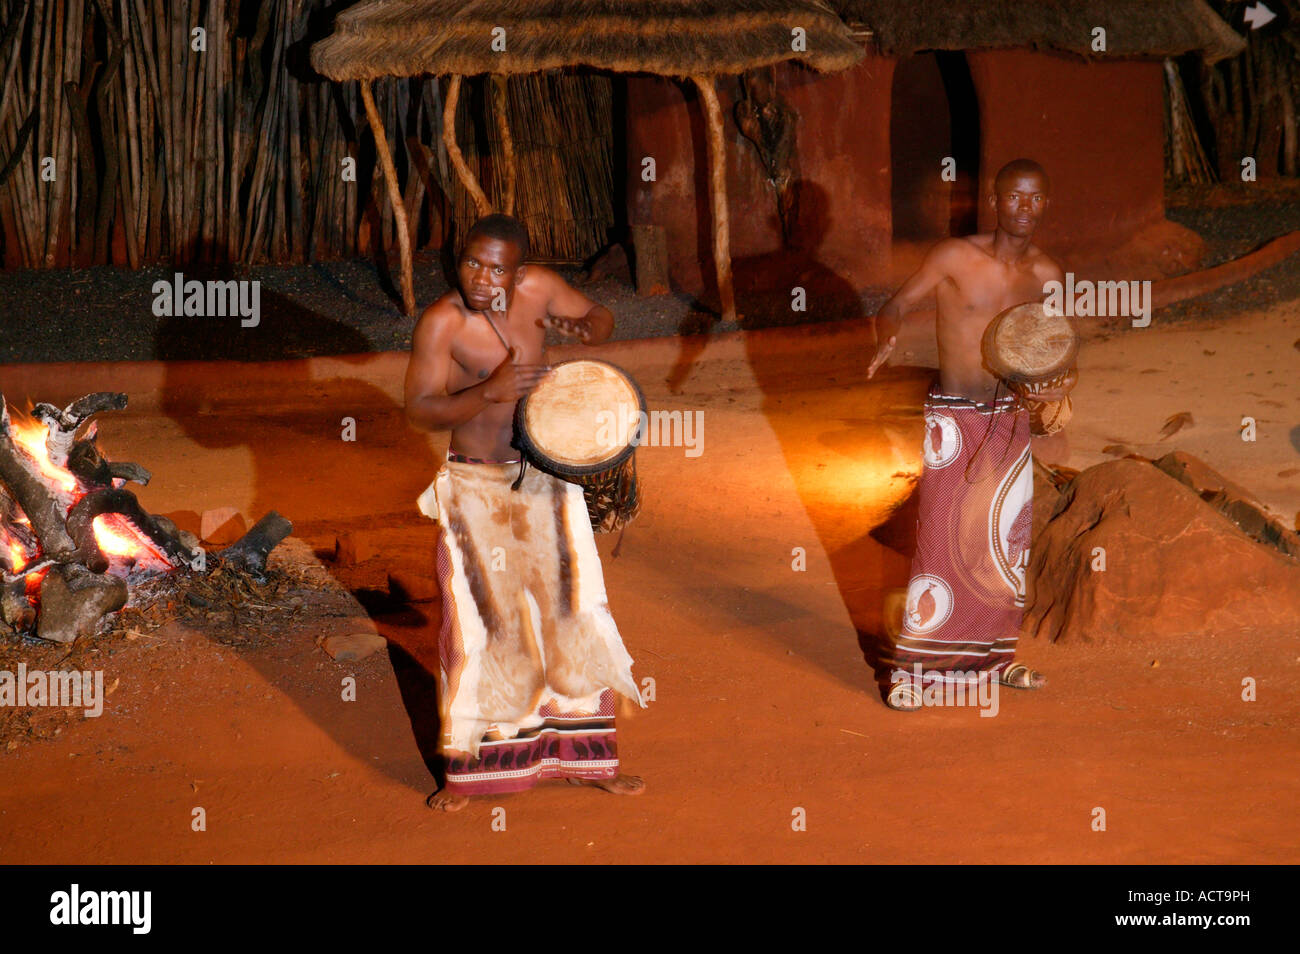 Drummers play at an evening dance show presented at the fireside in an outdoor boma at the Shangana cultural village Stock Photo